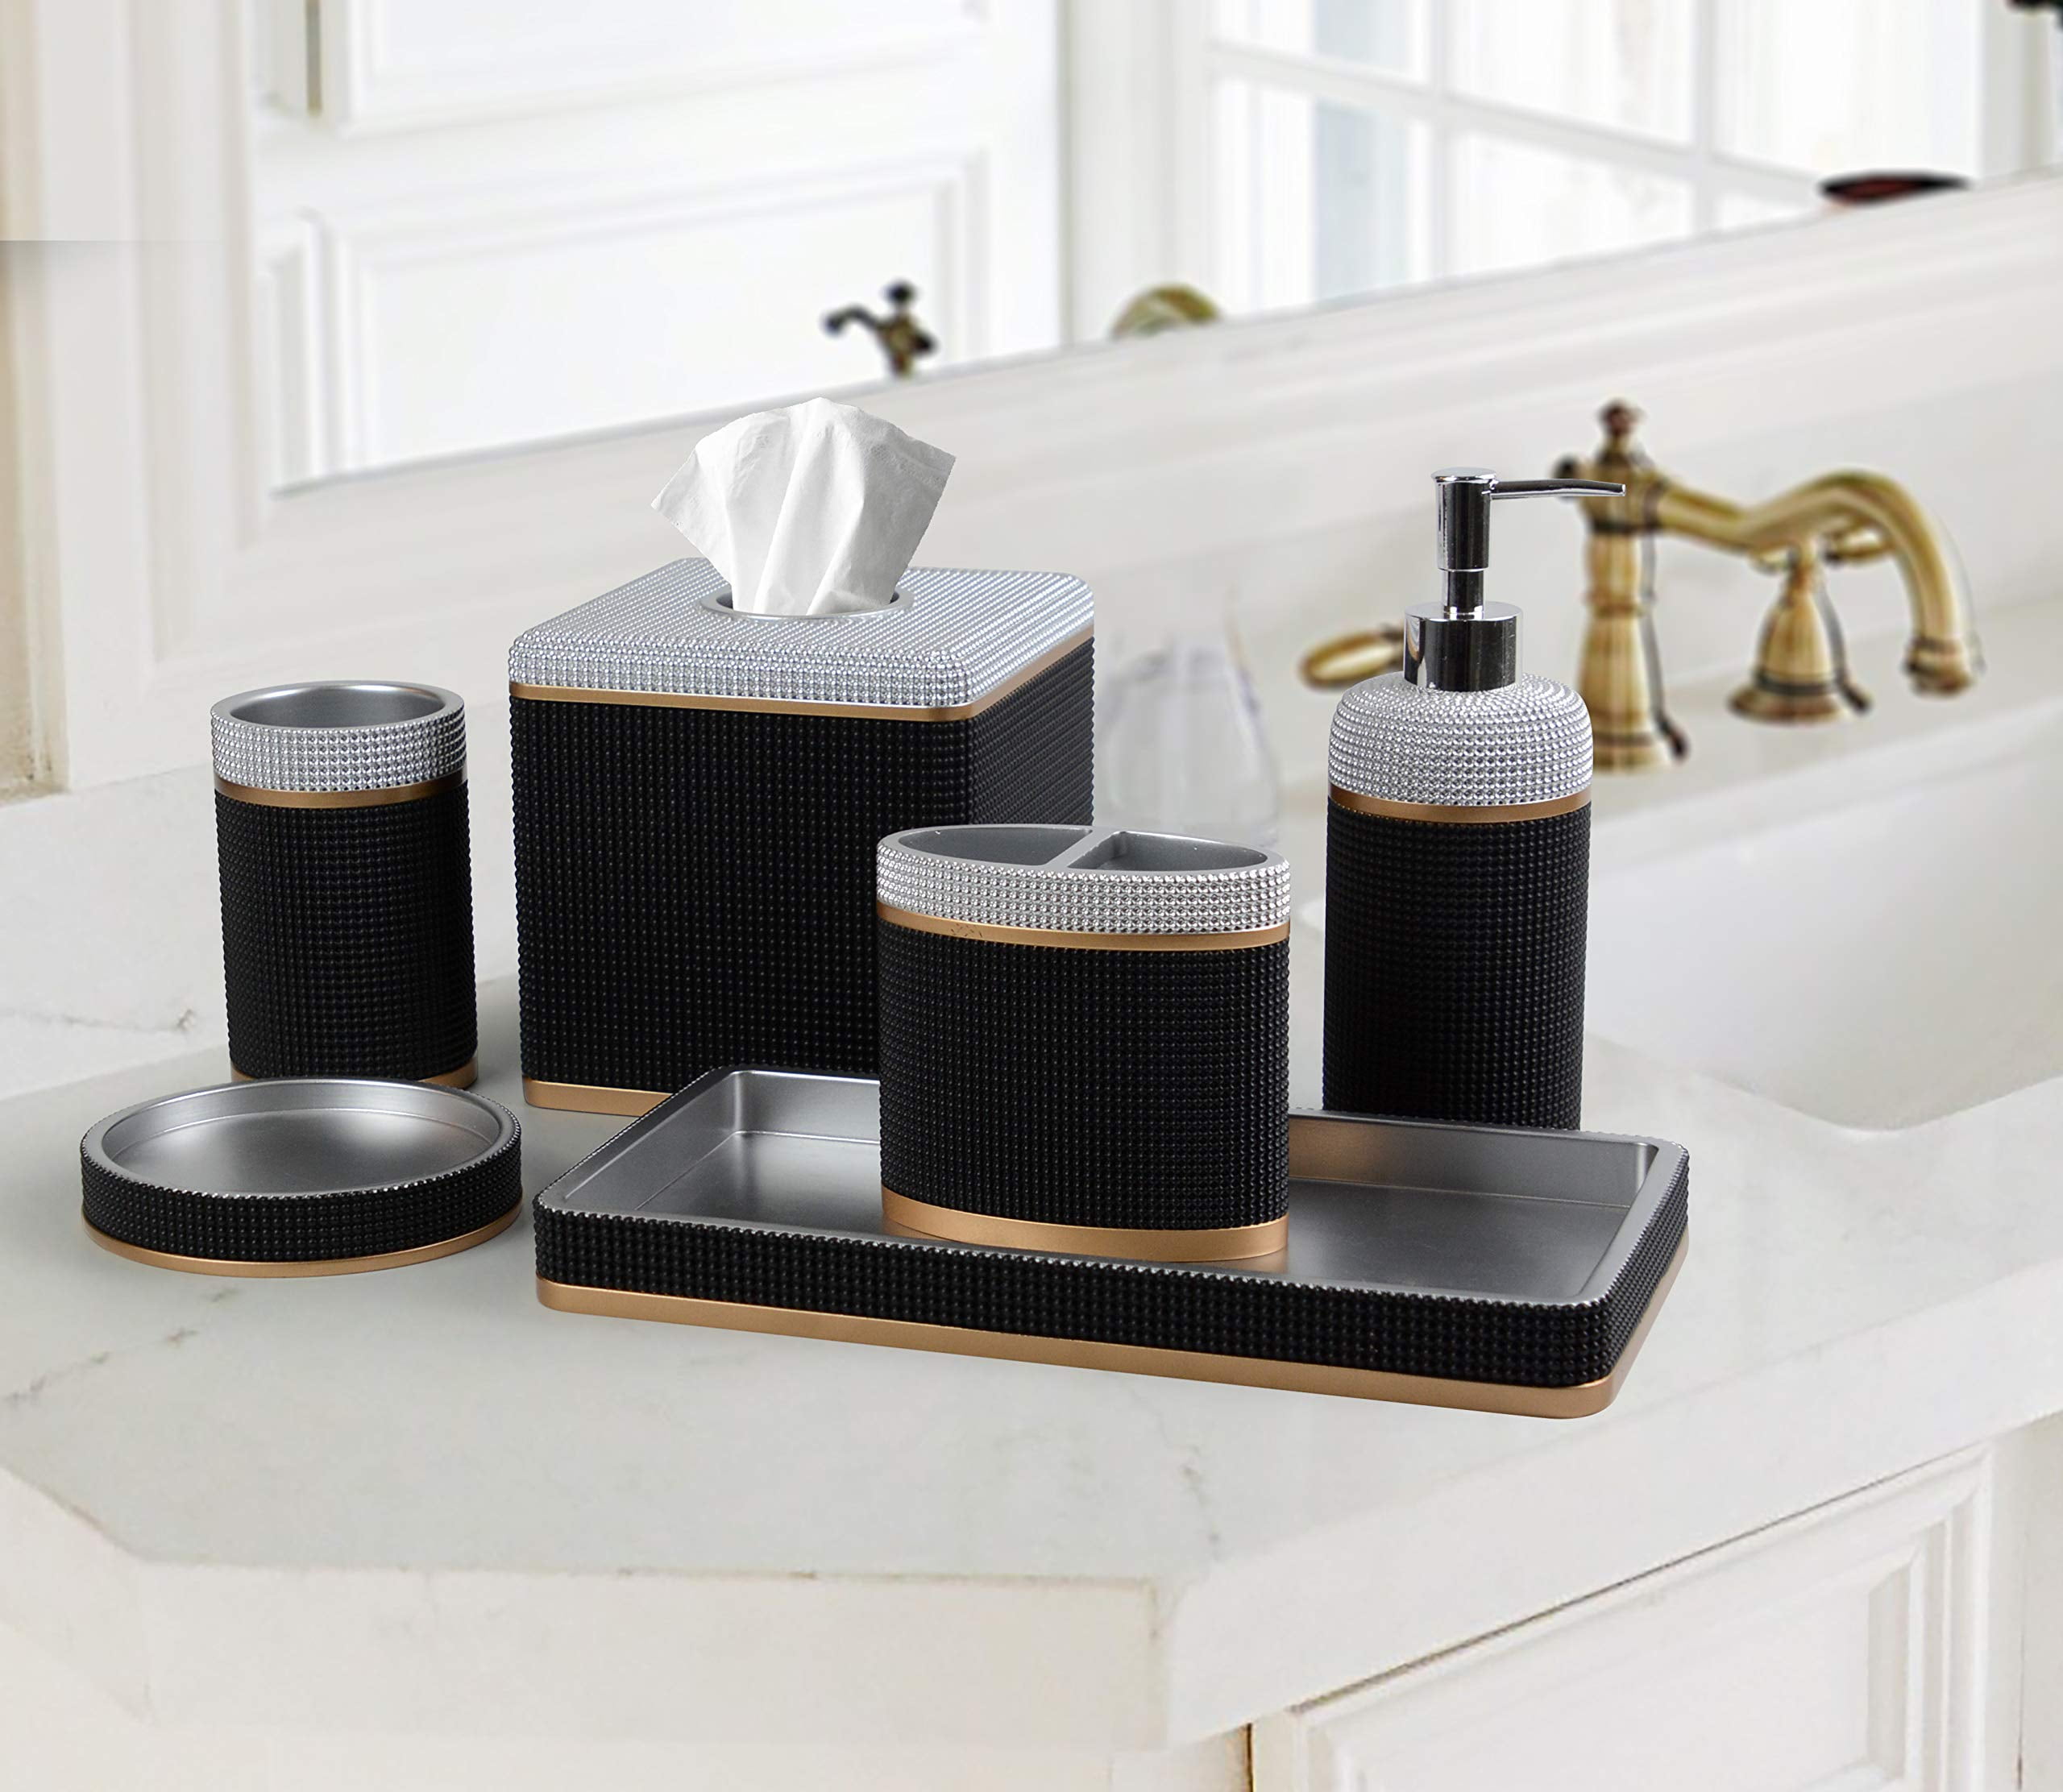 Bathroom Accessories Set 6 Pieces Includes Lotion Dispenser Toothbrush  Holder Soap Dish Tumbler Vanity Tray Tissue Box for Bath Decor 